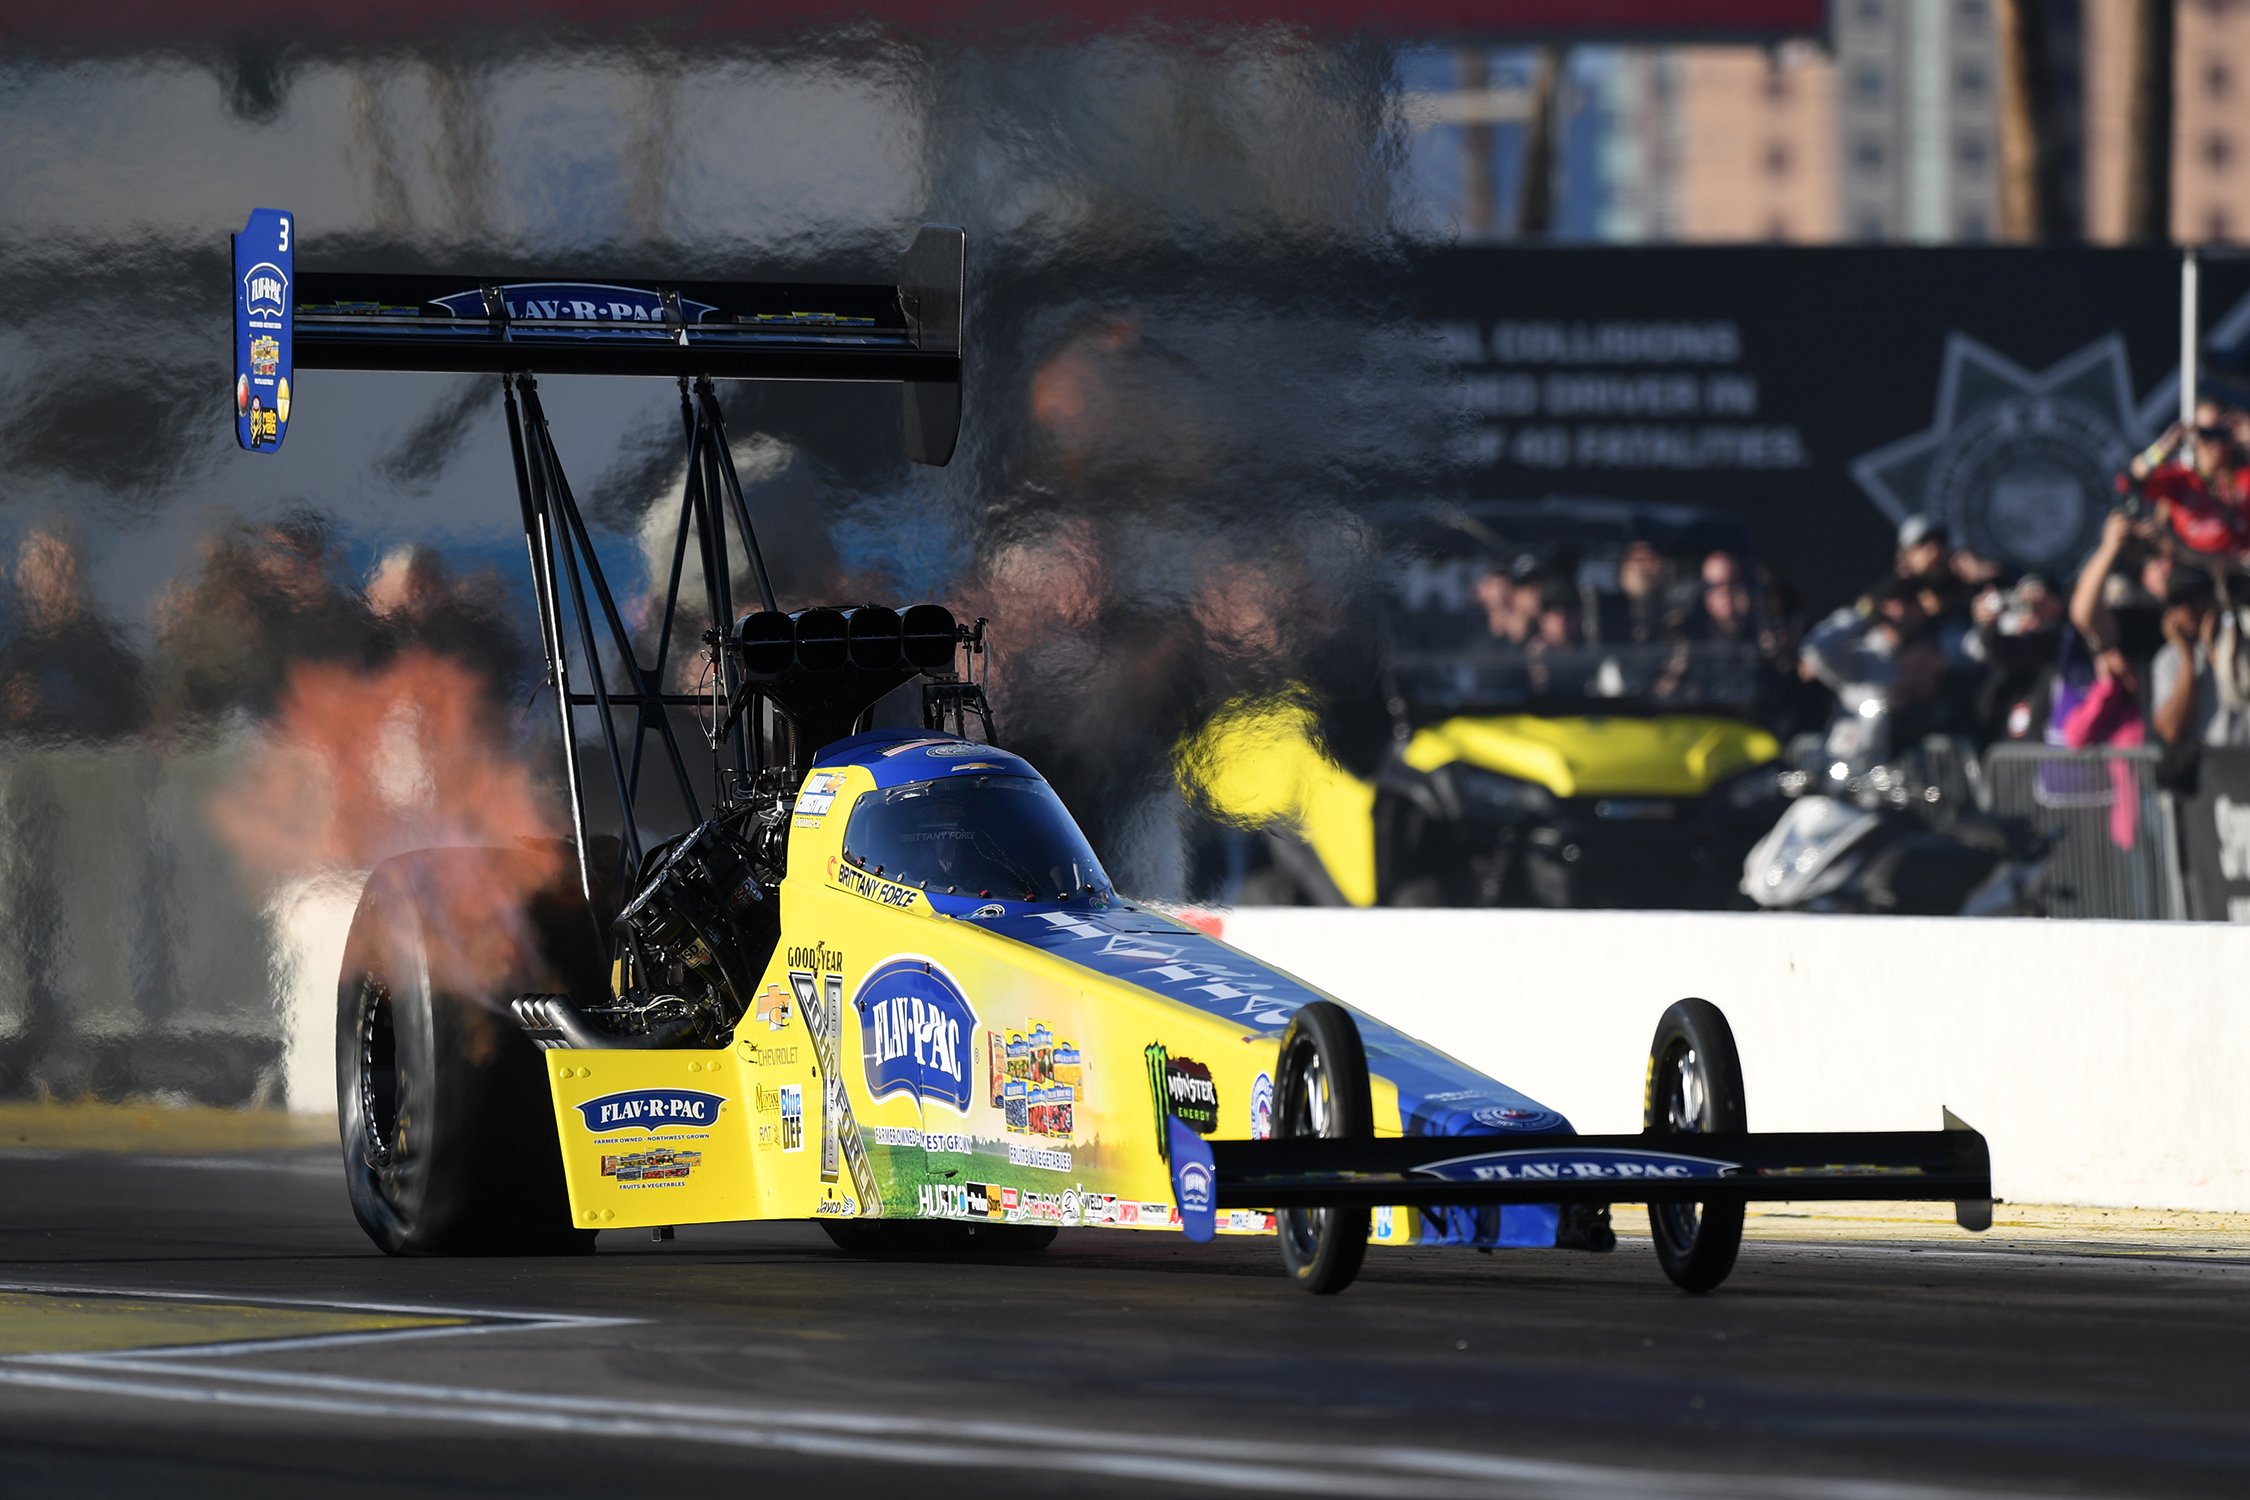 NHRA Announces Revised Schedule, Will Resume At Indy July 11-12